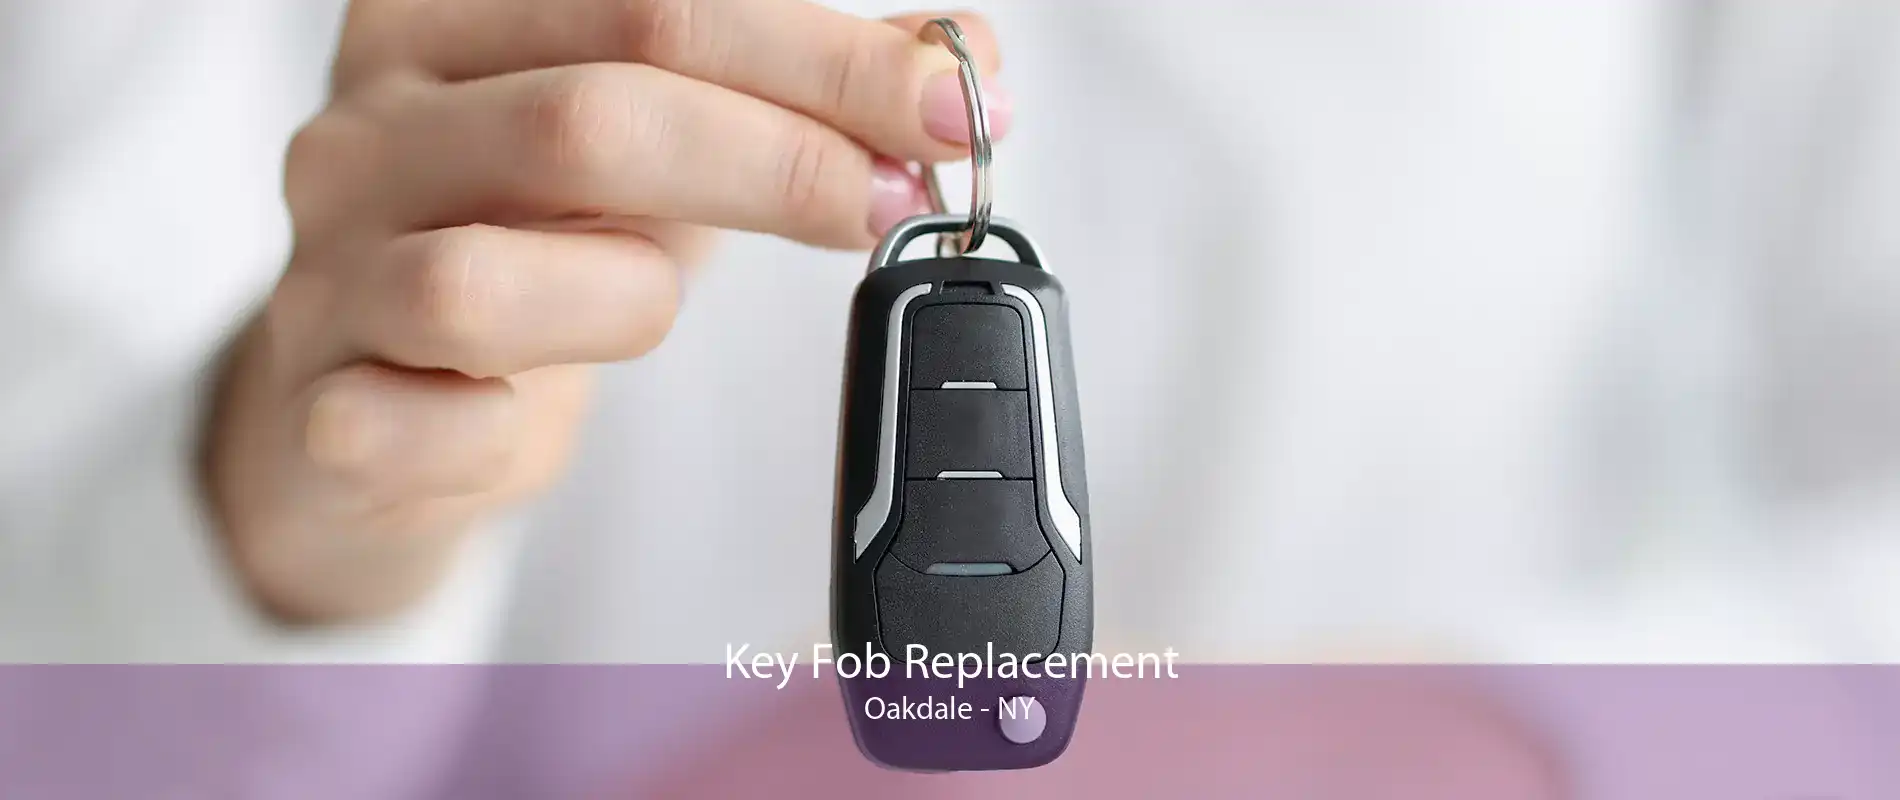 Key Fob Replacement Oakdale - NY